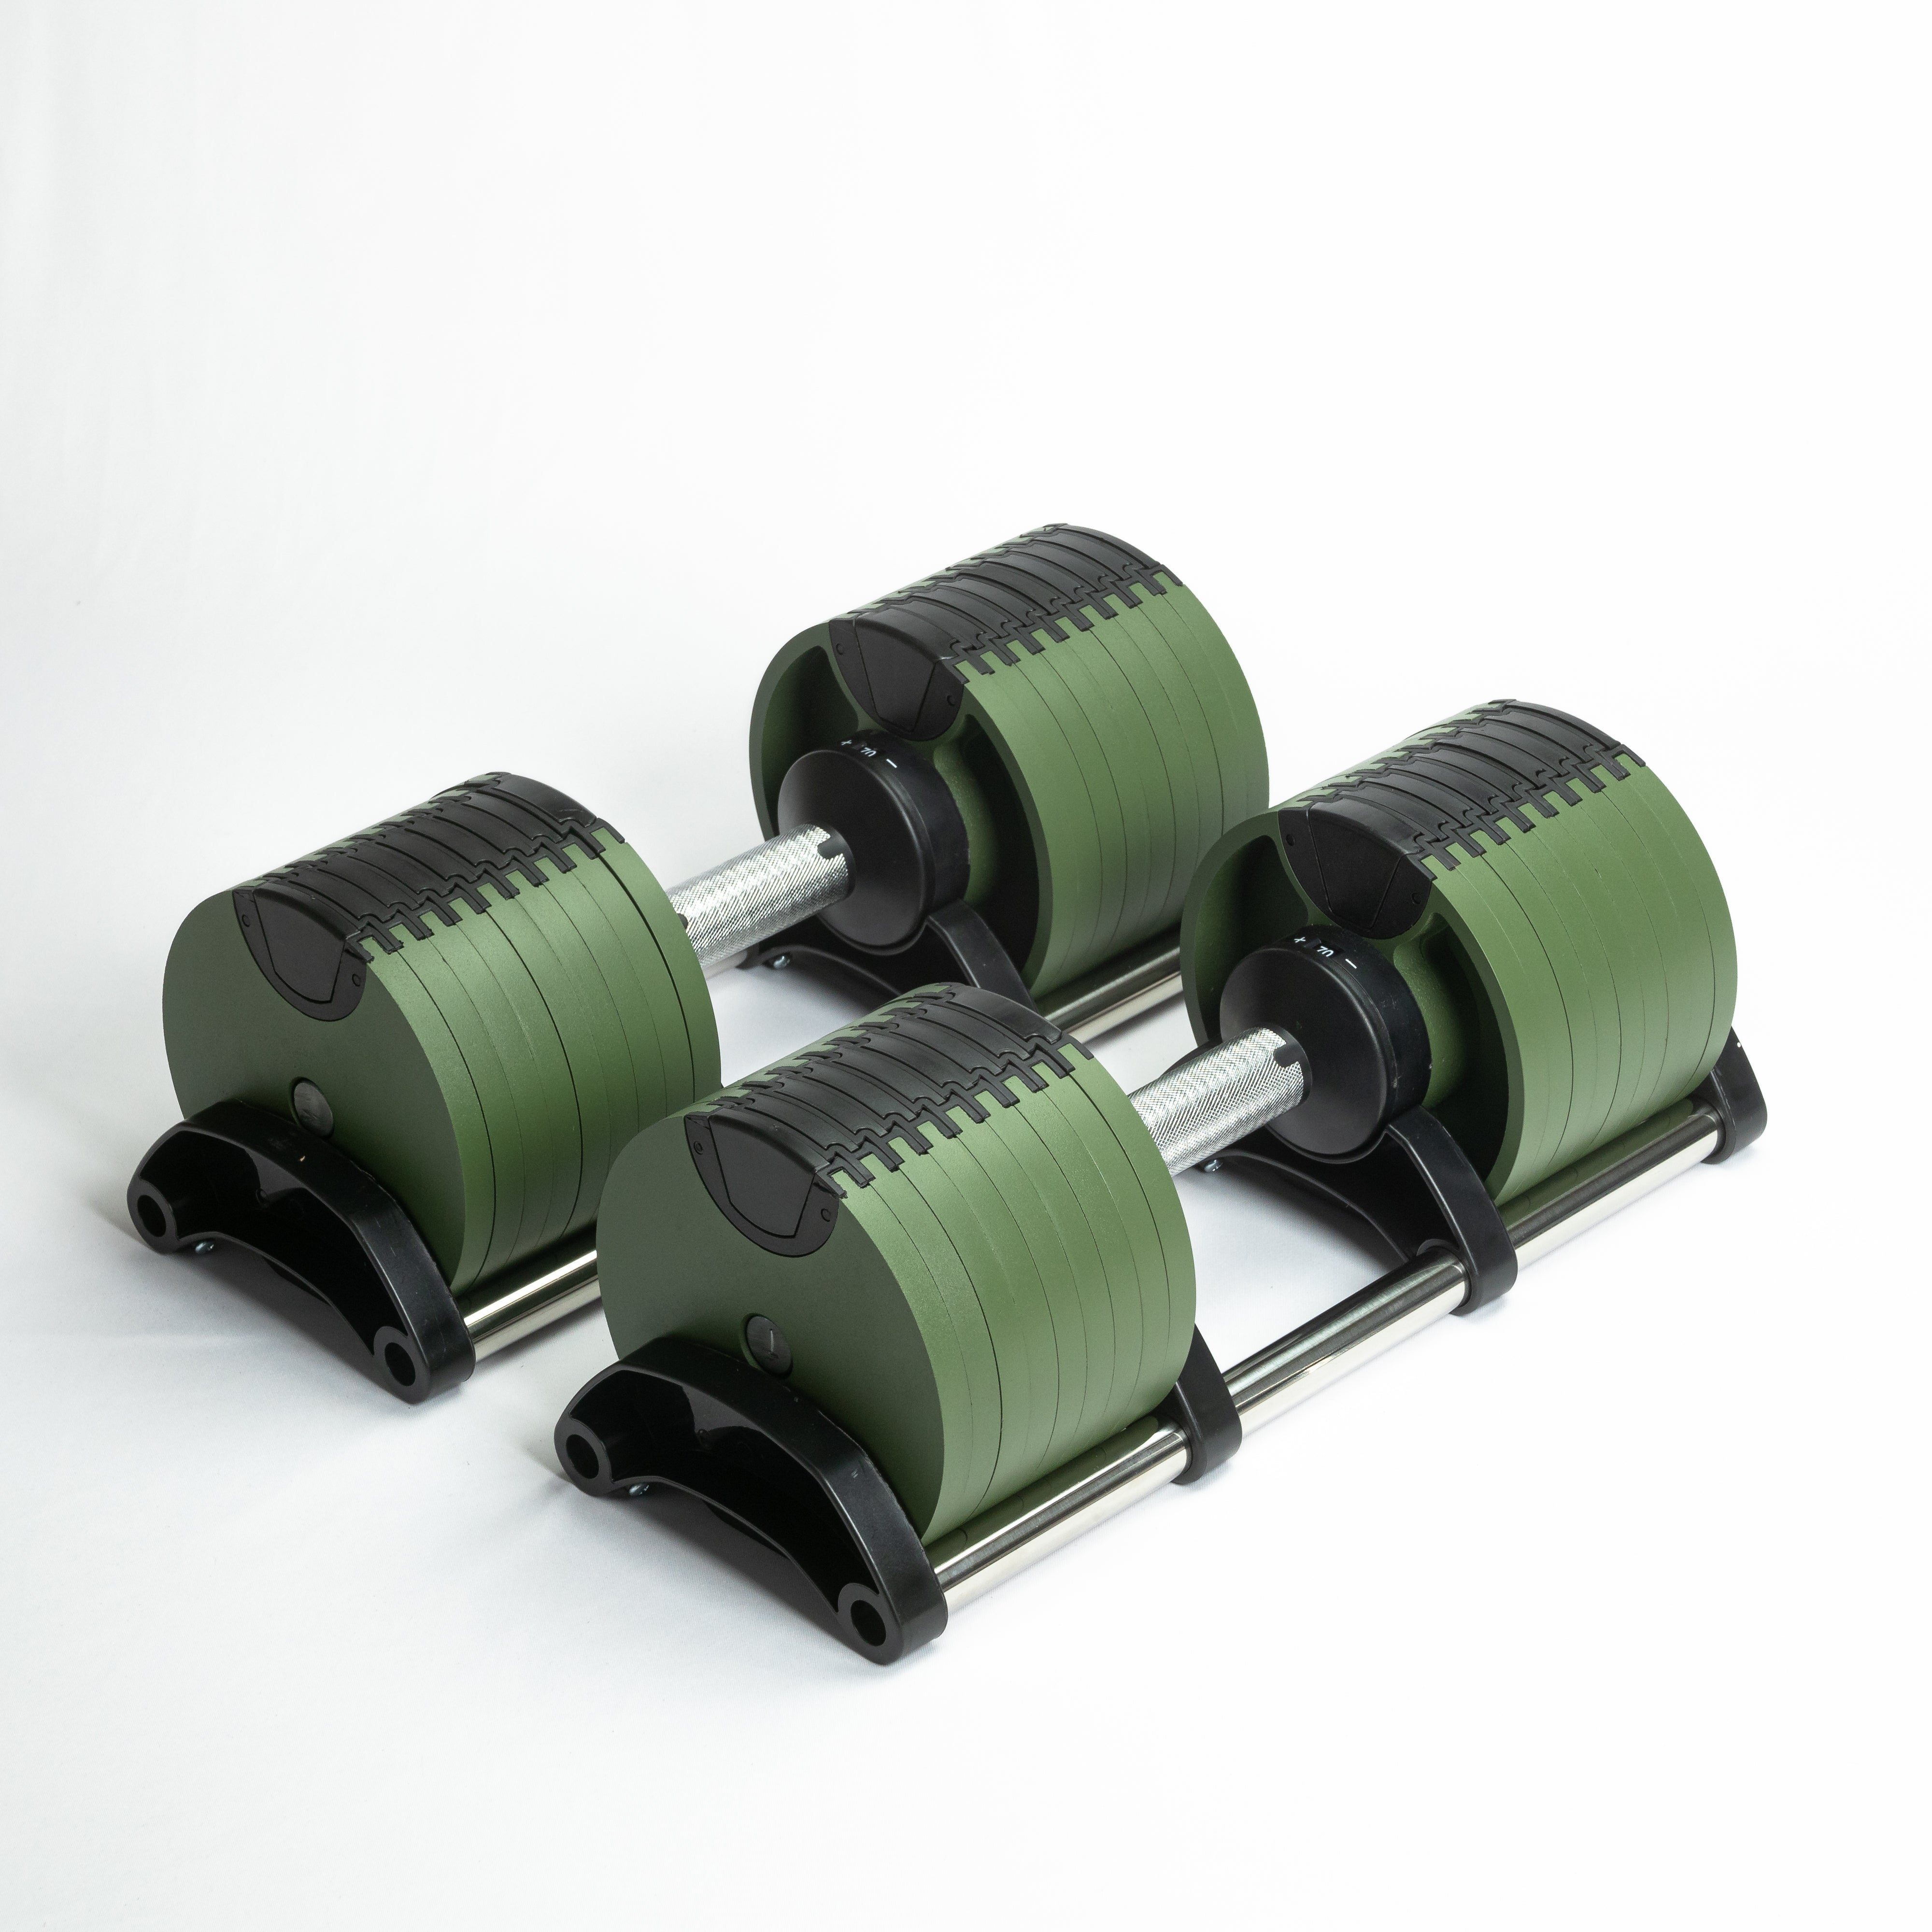 Compact Pro Set / 2 Adjustable Dumbbells / 5 to 70 lbs - Montreal Fitness